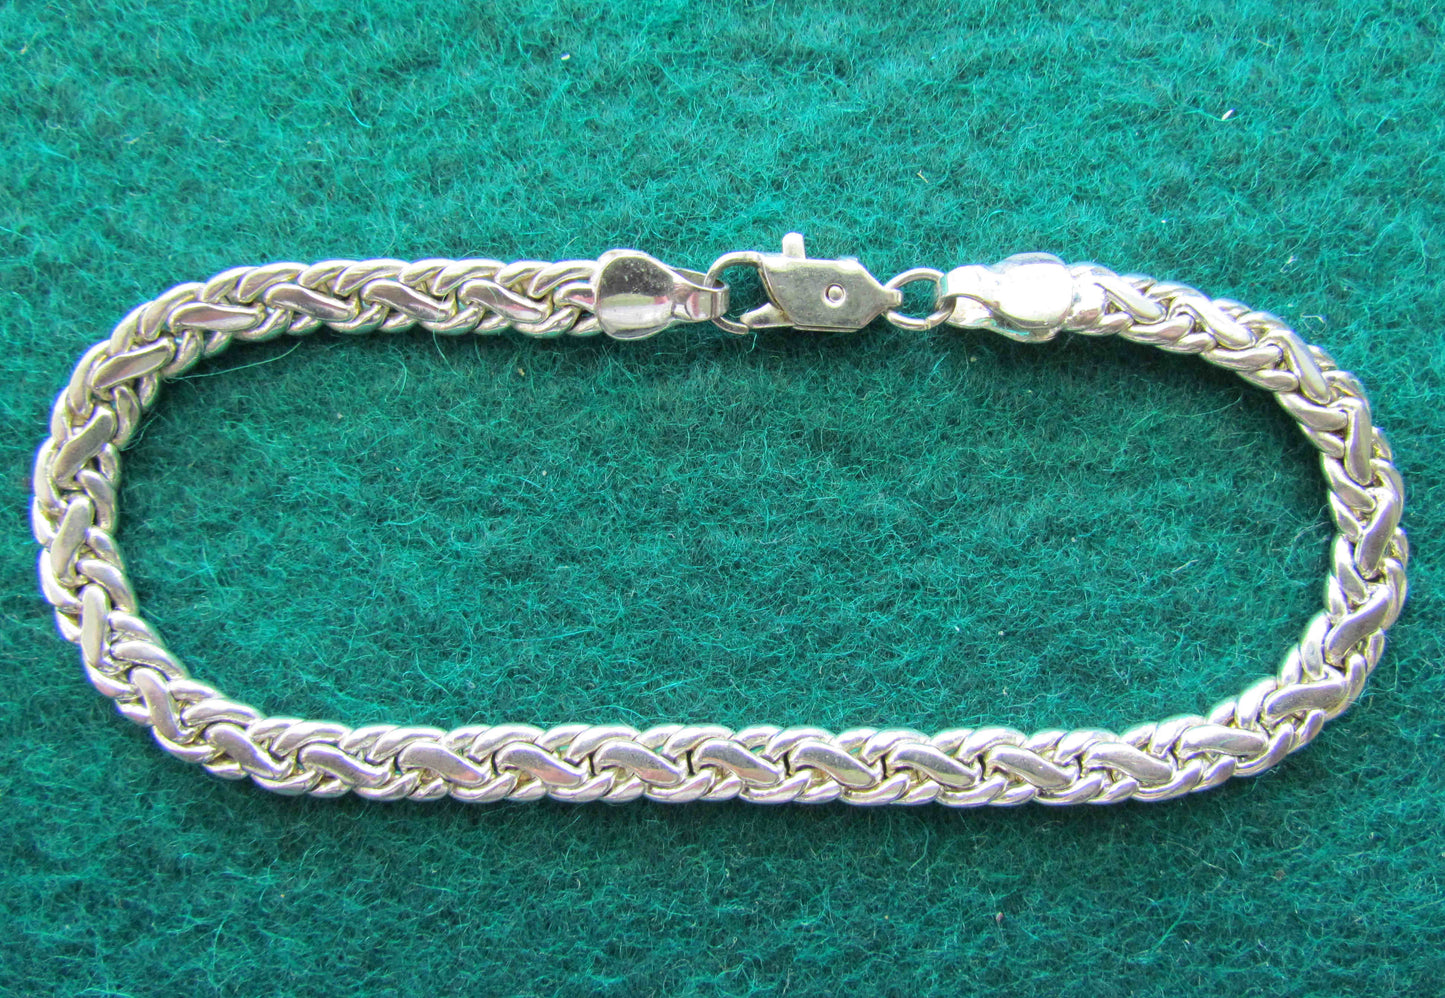 925 Sterling Silver Bracelet With Crab Claw Clasp